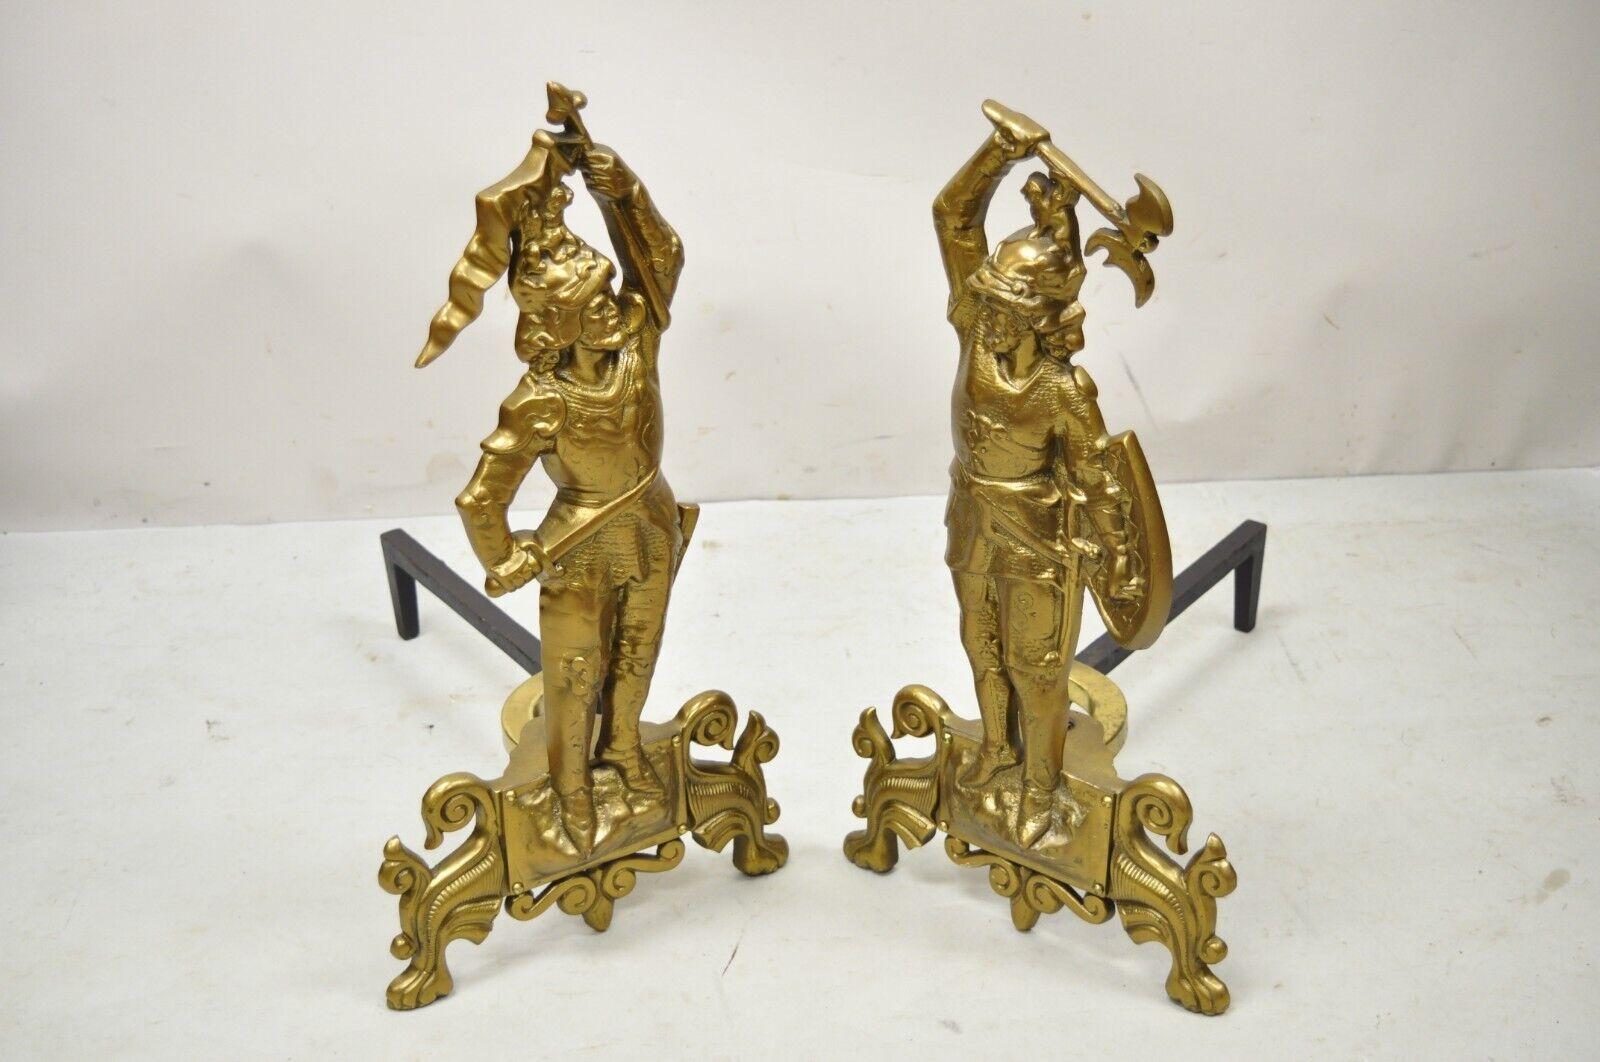 Vintage Cast Brass Figural Renaissance Soldier Warrior Fireplace Andirons - a Pair. Item features cast brass figural forms of warriors, cast iron supports, very nice vintage pair, great style and form. Circa Mid 20th Century. Measurements: 22.5